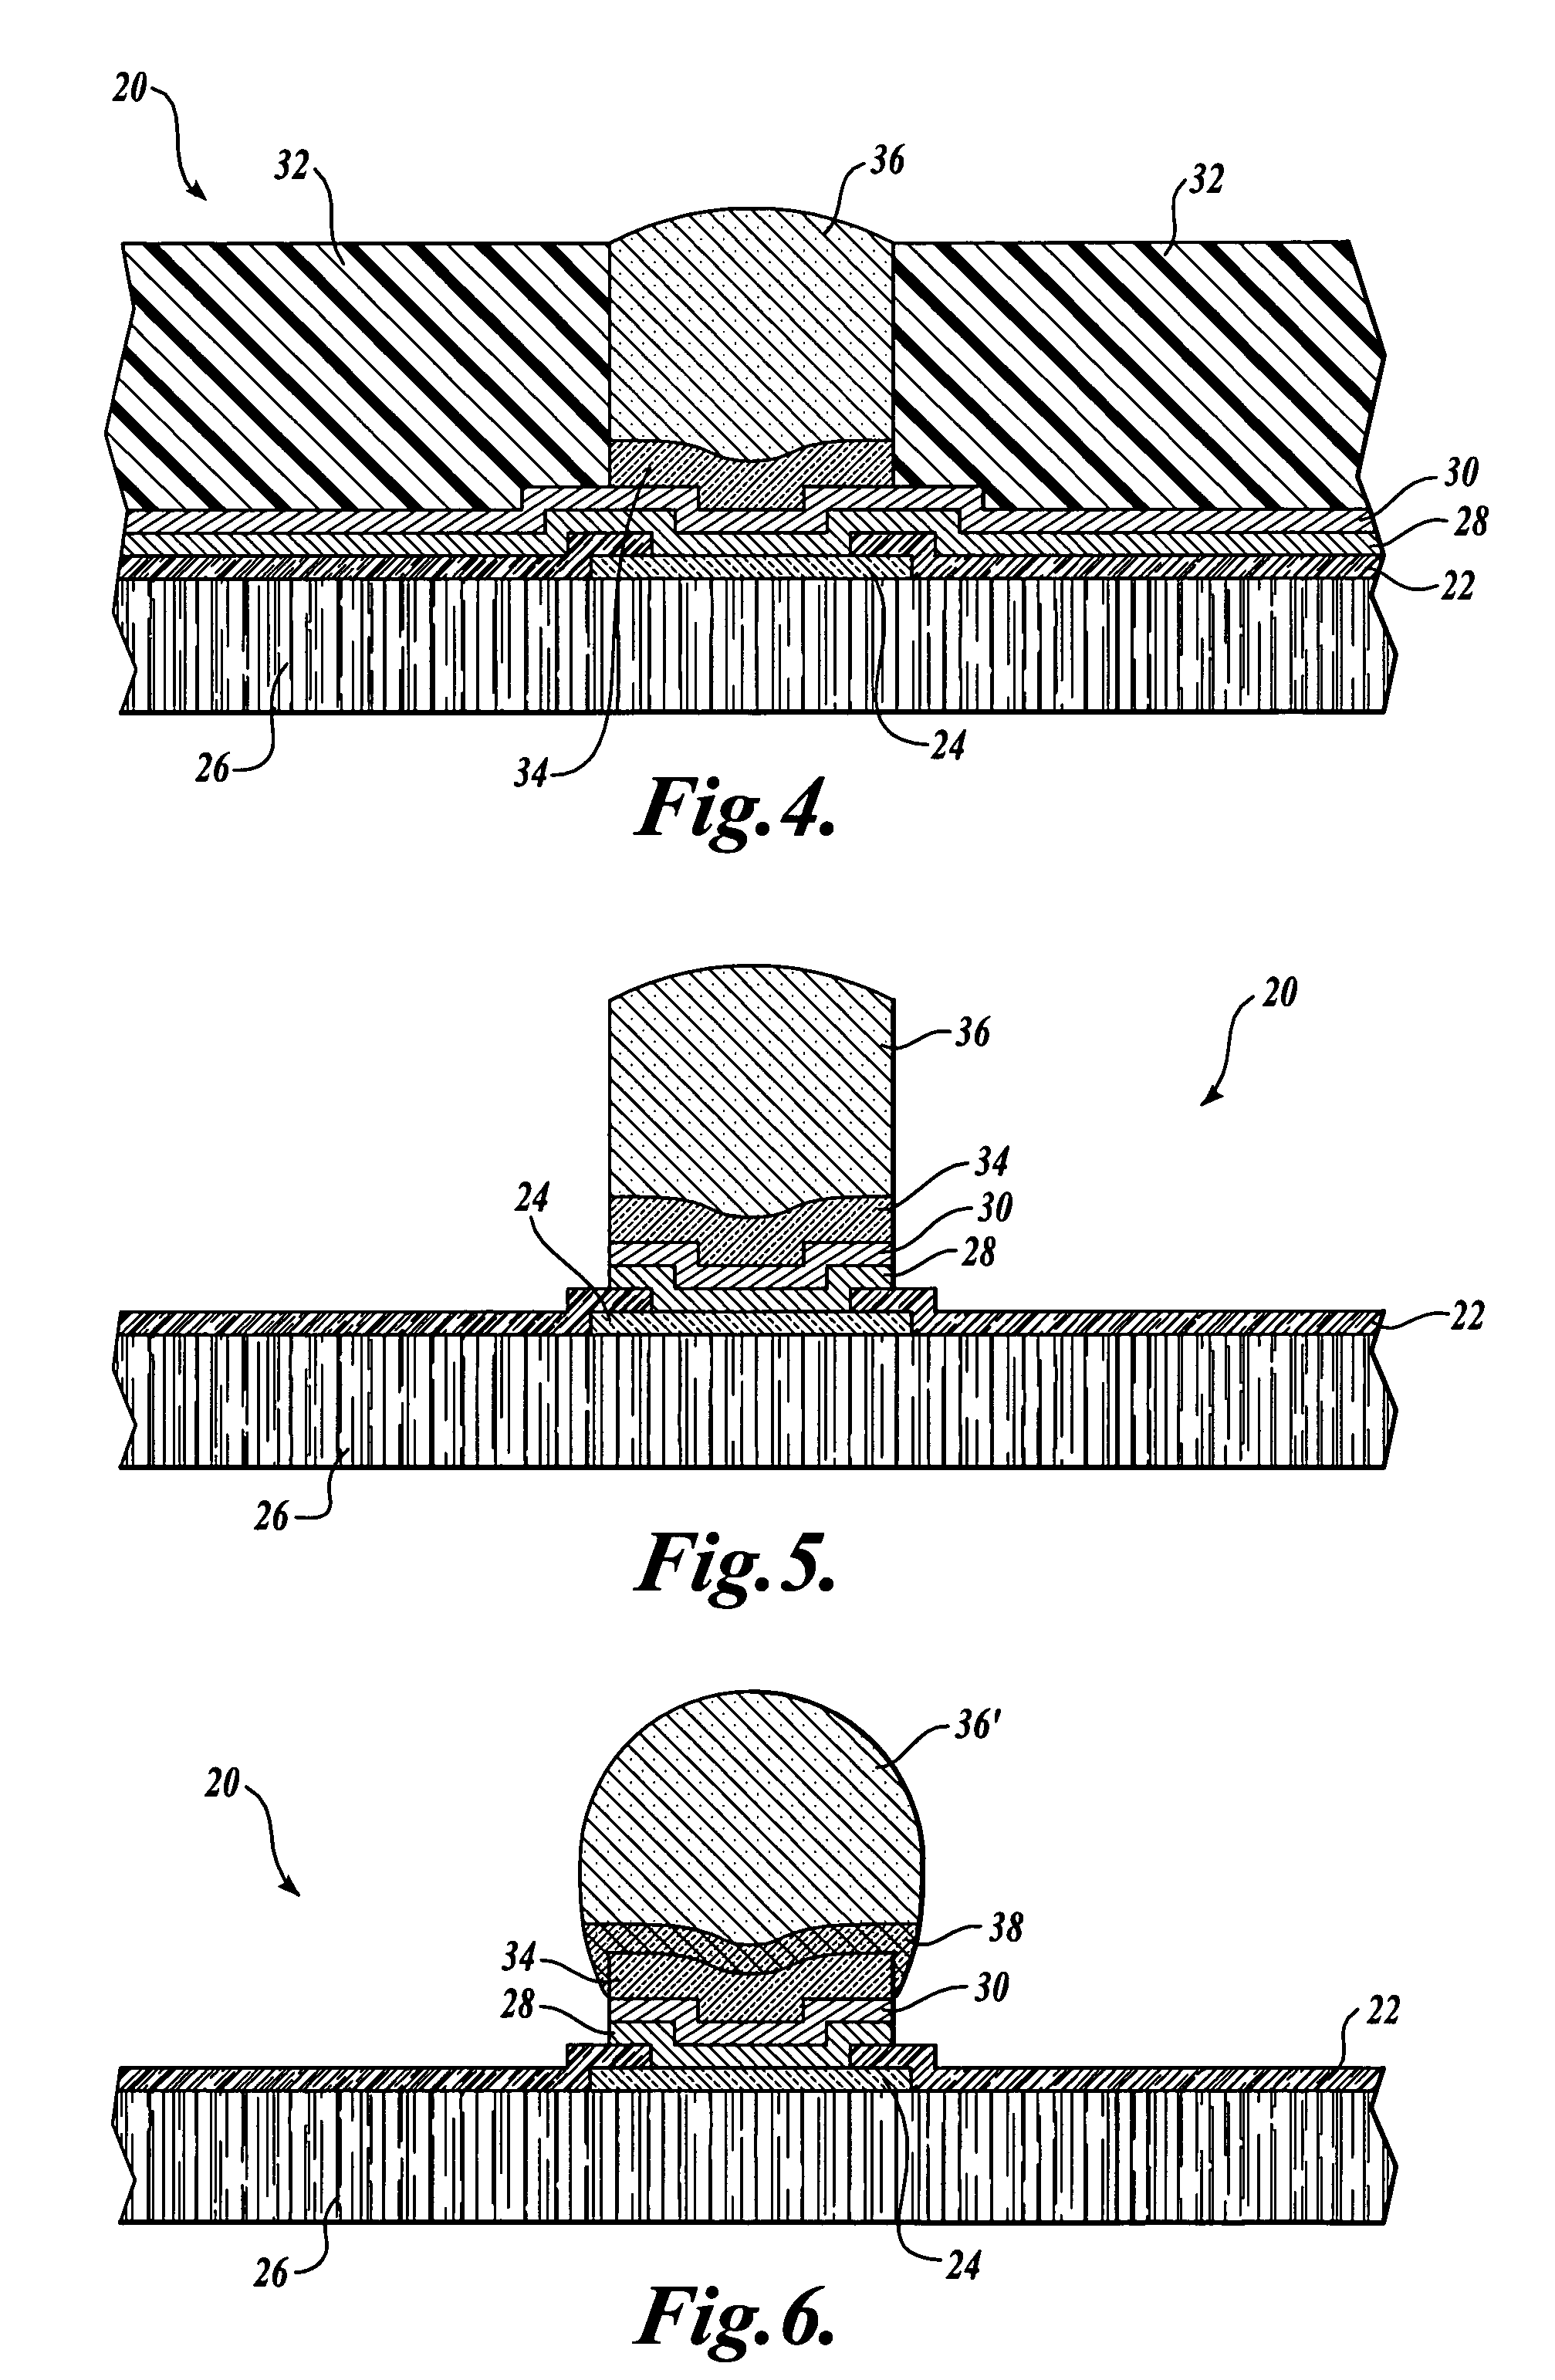 Bath and method for high rate copper deposition